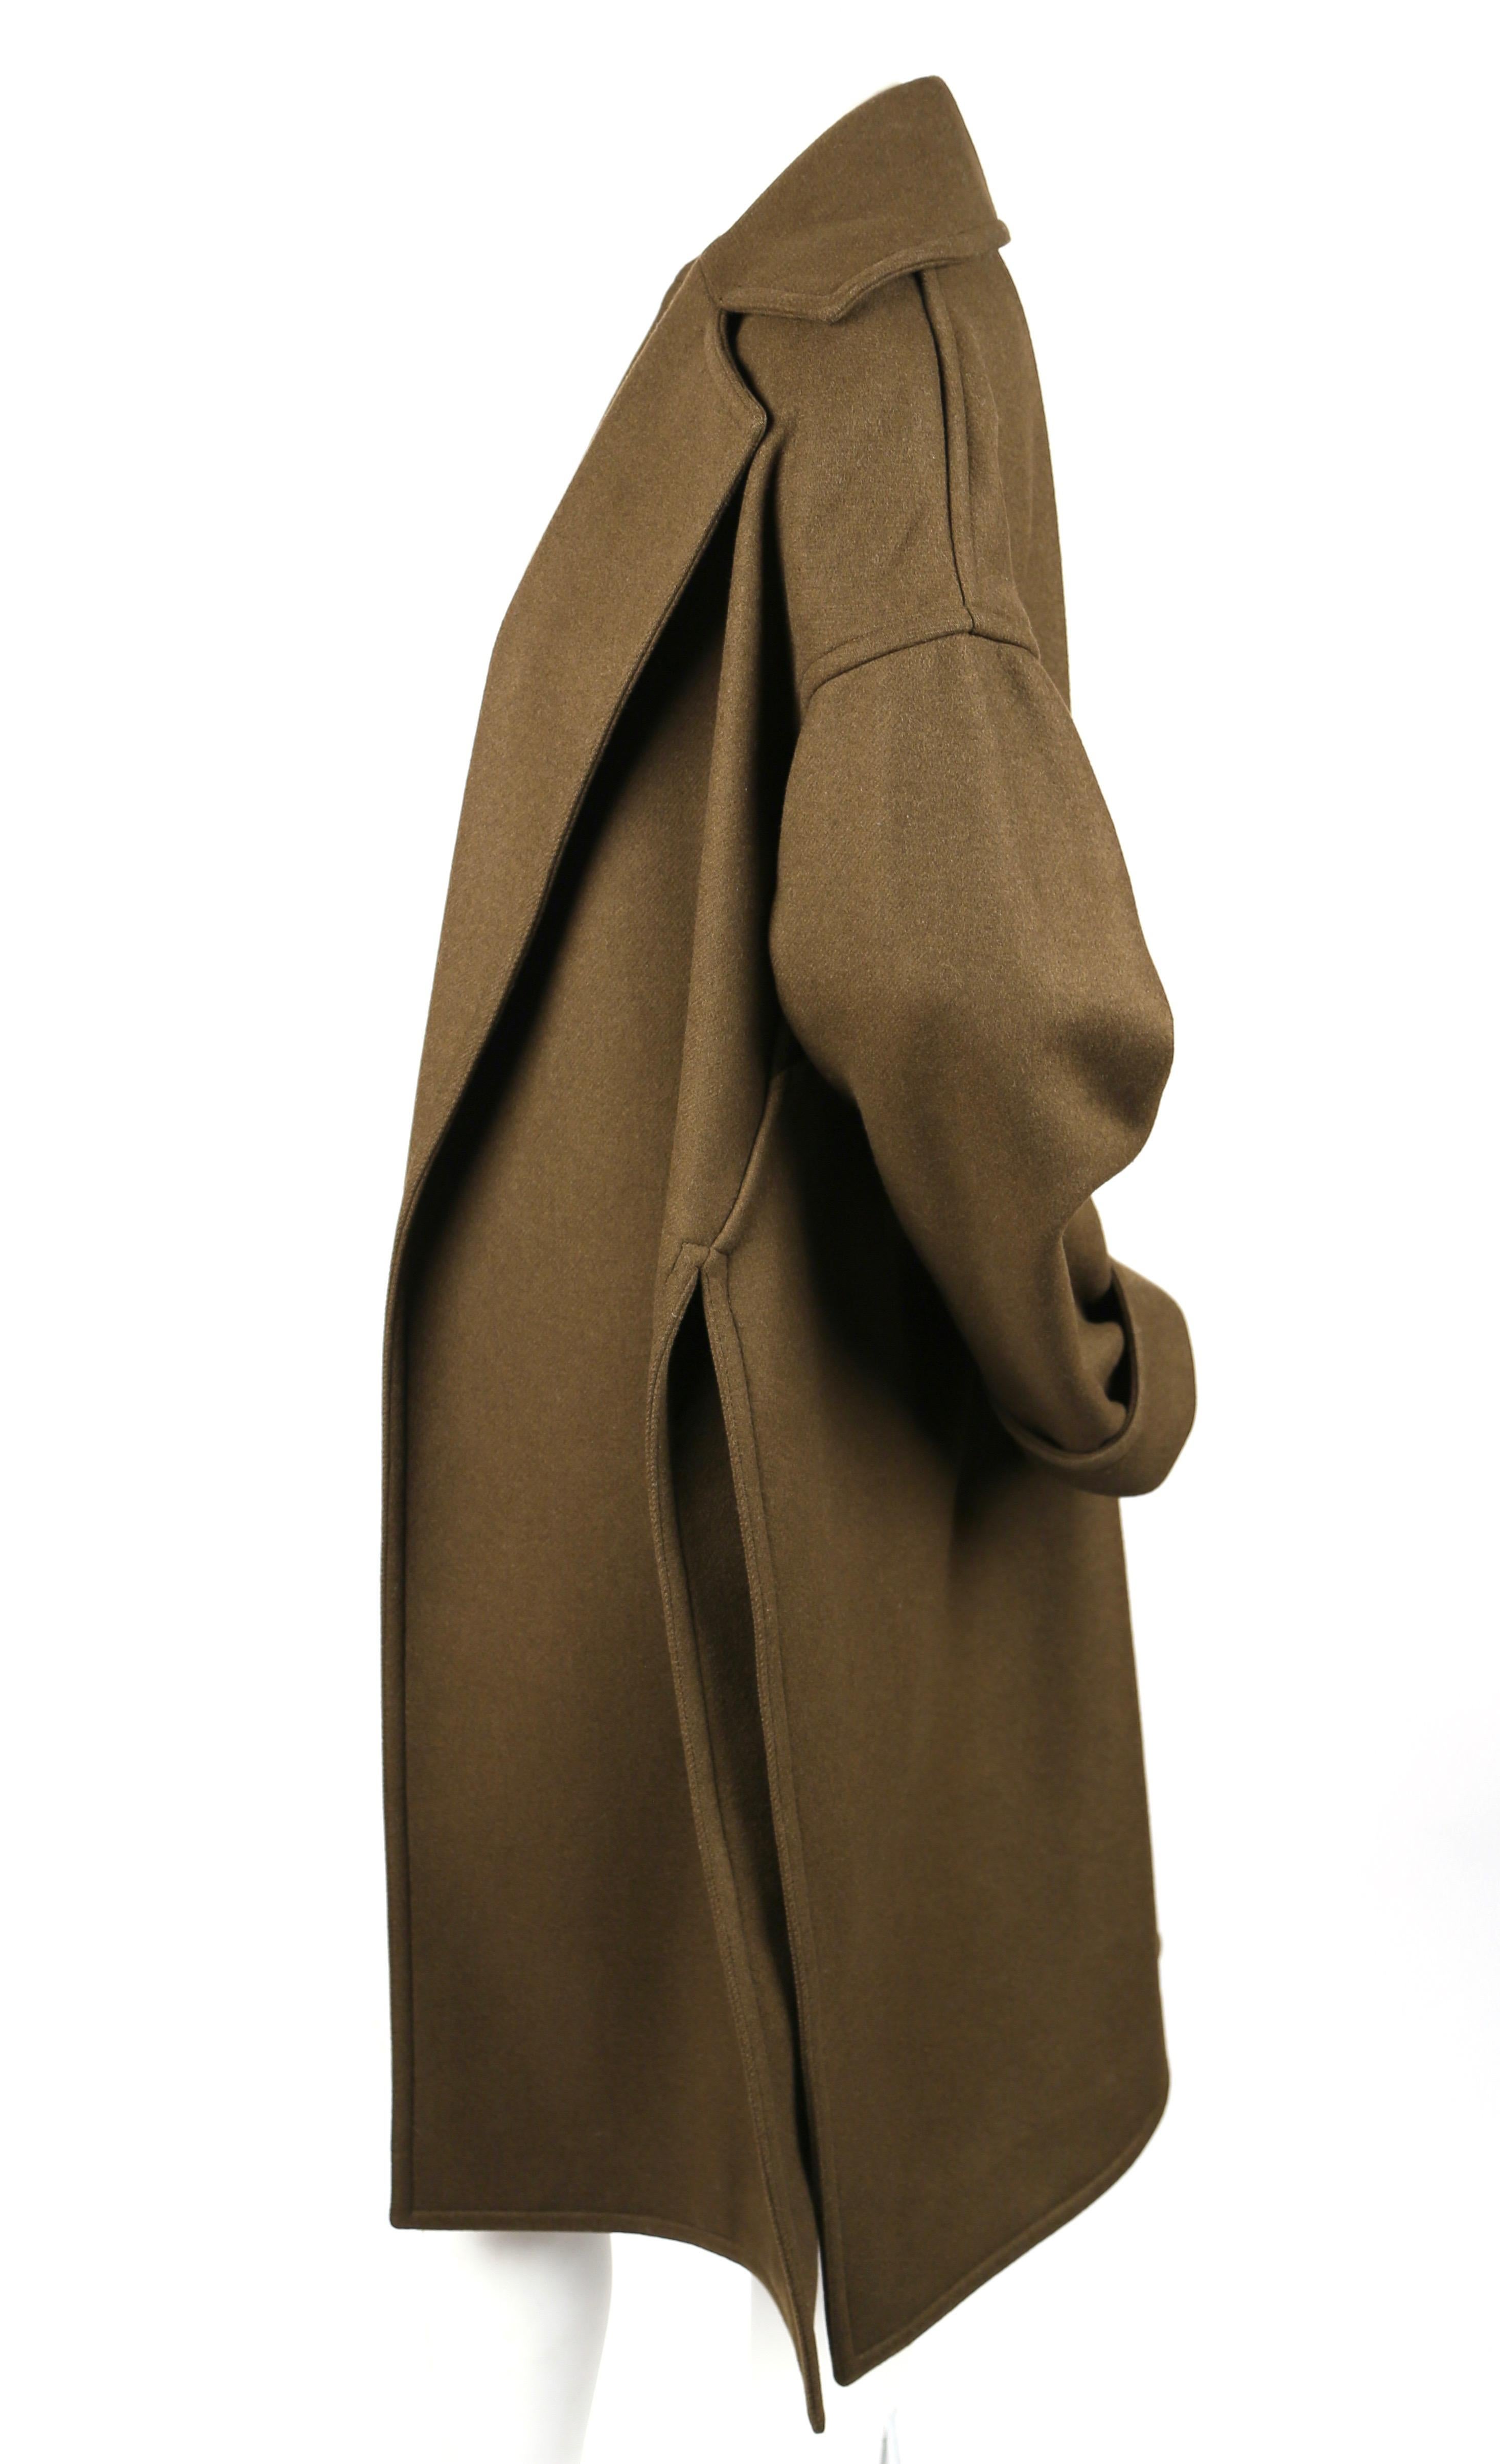 2015 CELINE By Phoebe Philo Khaki Wool Coat With Open Closure In Excellent Condition For Sale In San Fransisco, CA